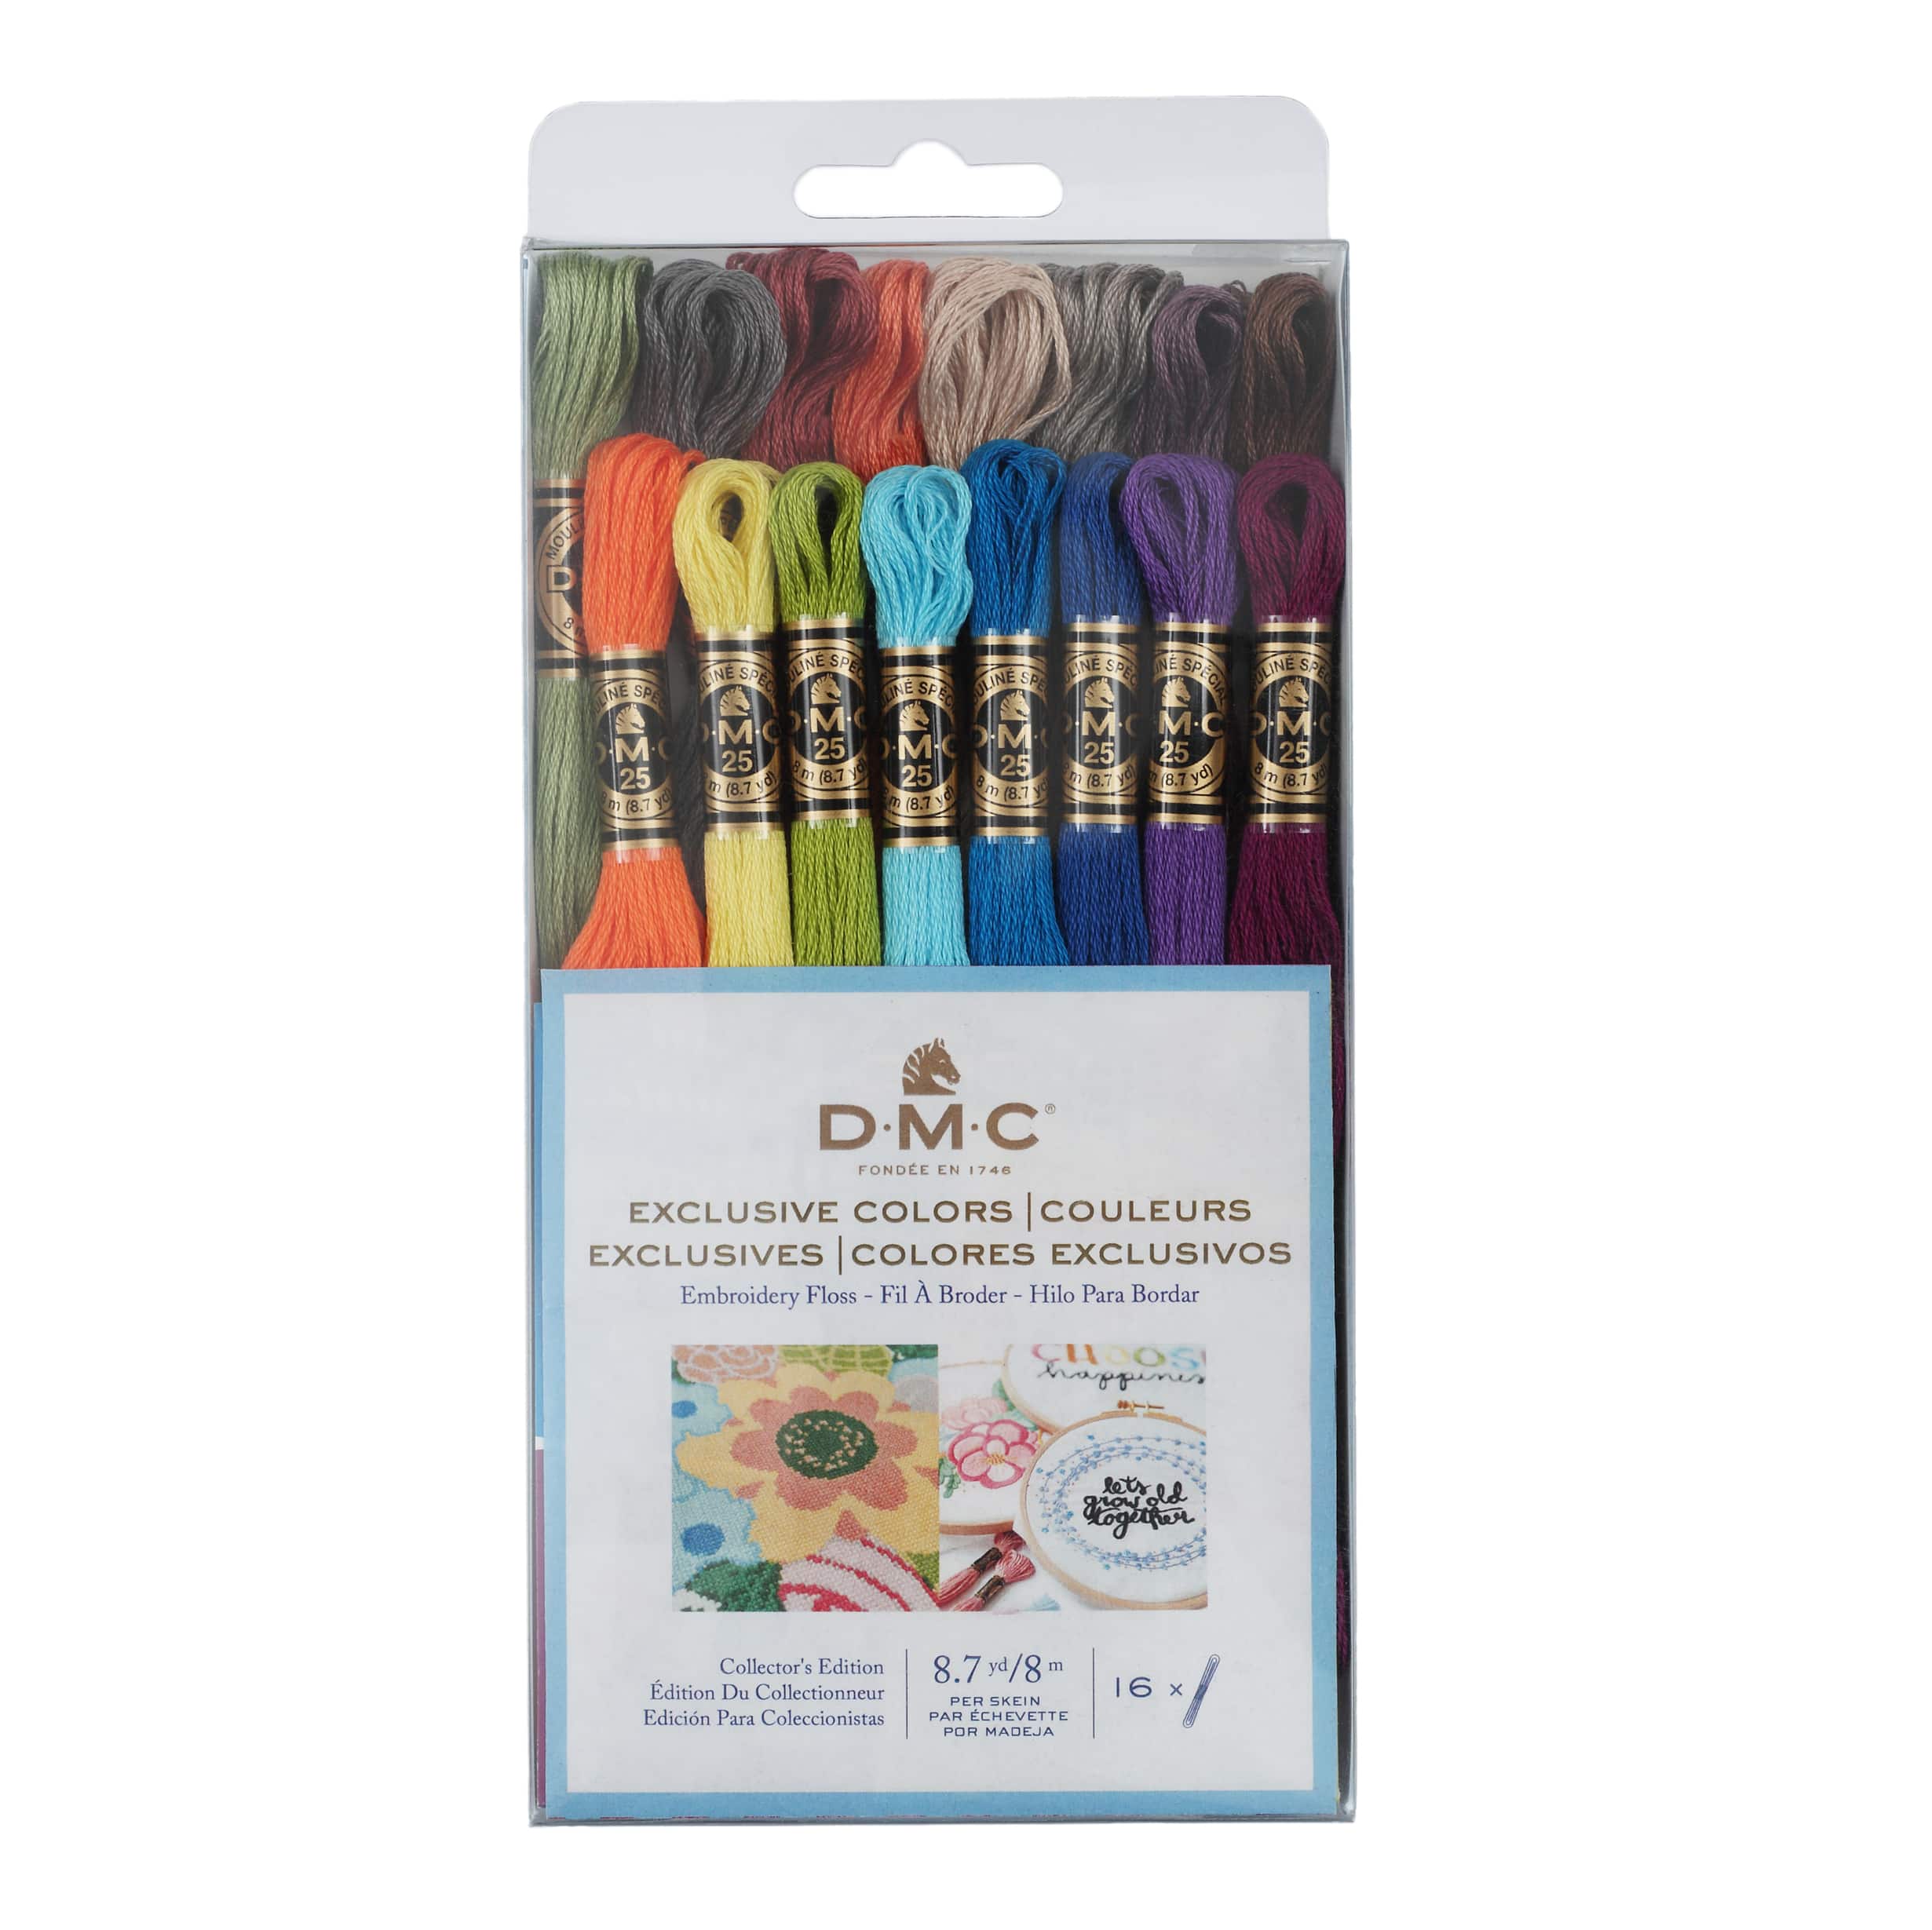 DMC Embroidery Floss Pack, Popular Colors, DMC Embroidery Thread, DMC Floss  Kit Include 36 Assorted Color Bundle with DMC Mouline Cotton White/Black  and DMC Cross Stitch Hand Needles. 